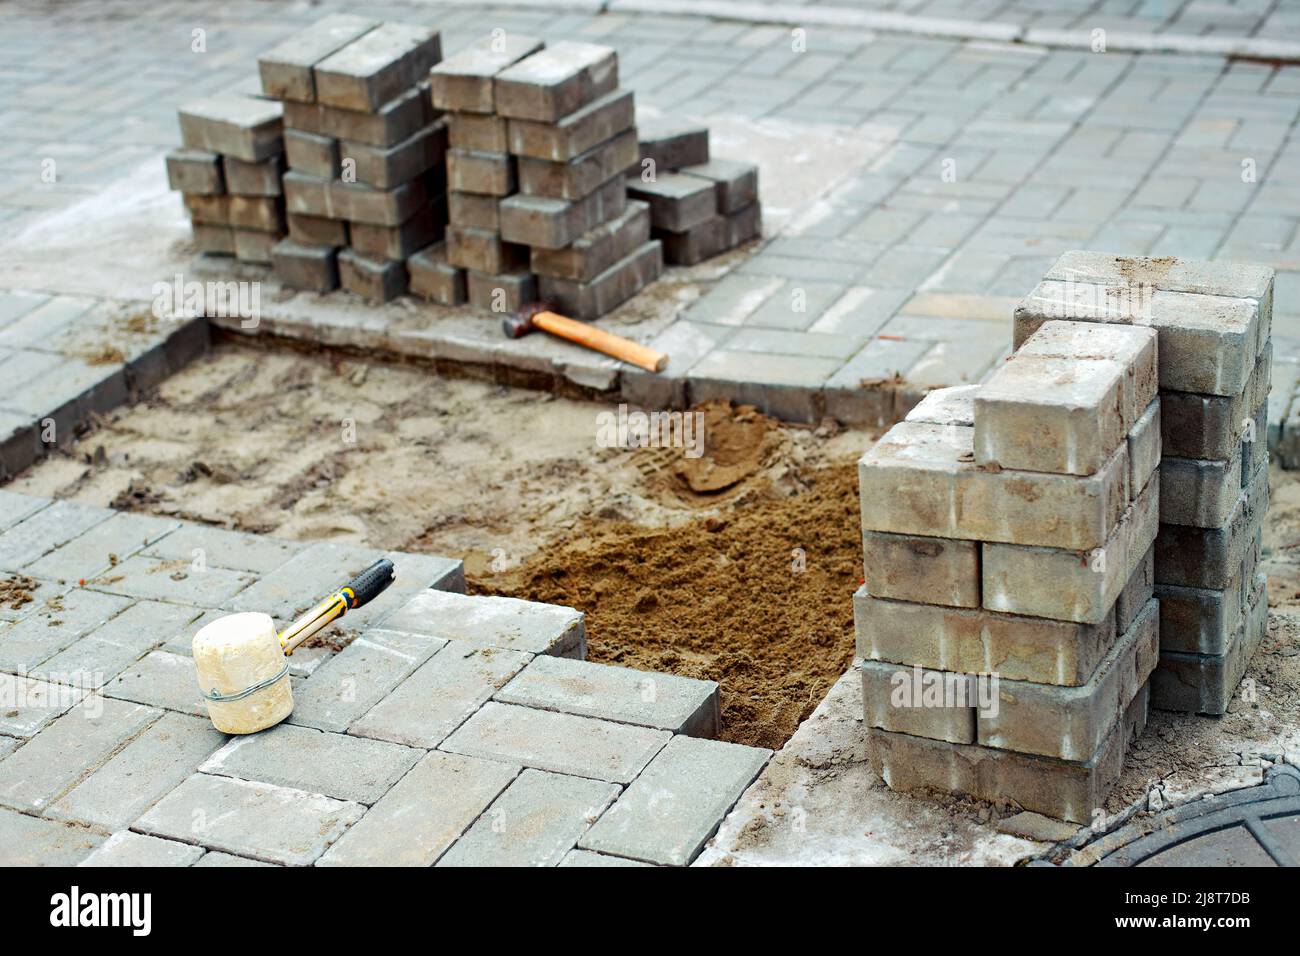 View of new paving slabs and concrete blocks on summer day at construction site. Stone blocks stand in stack. Repair of square and sidewalks. Restoration of road surface. Stock Photo